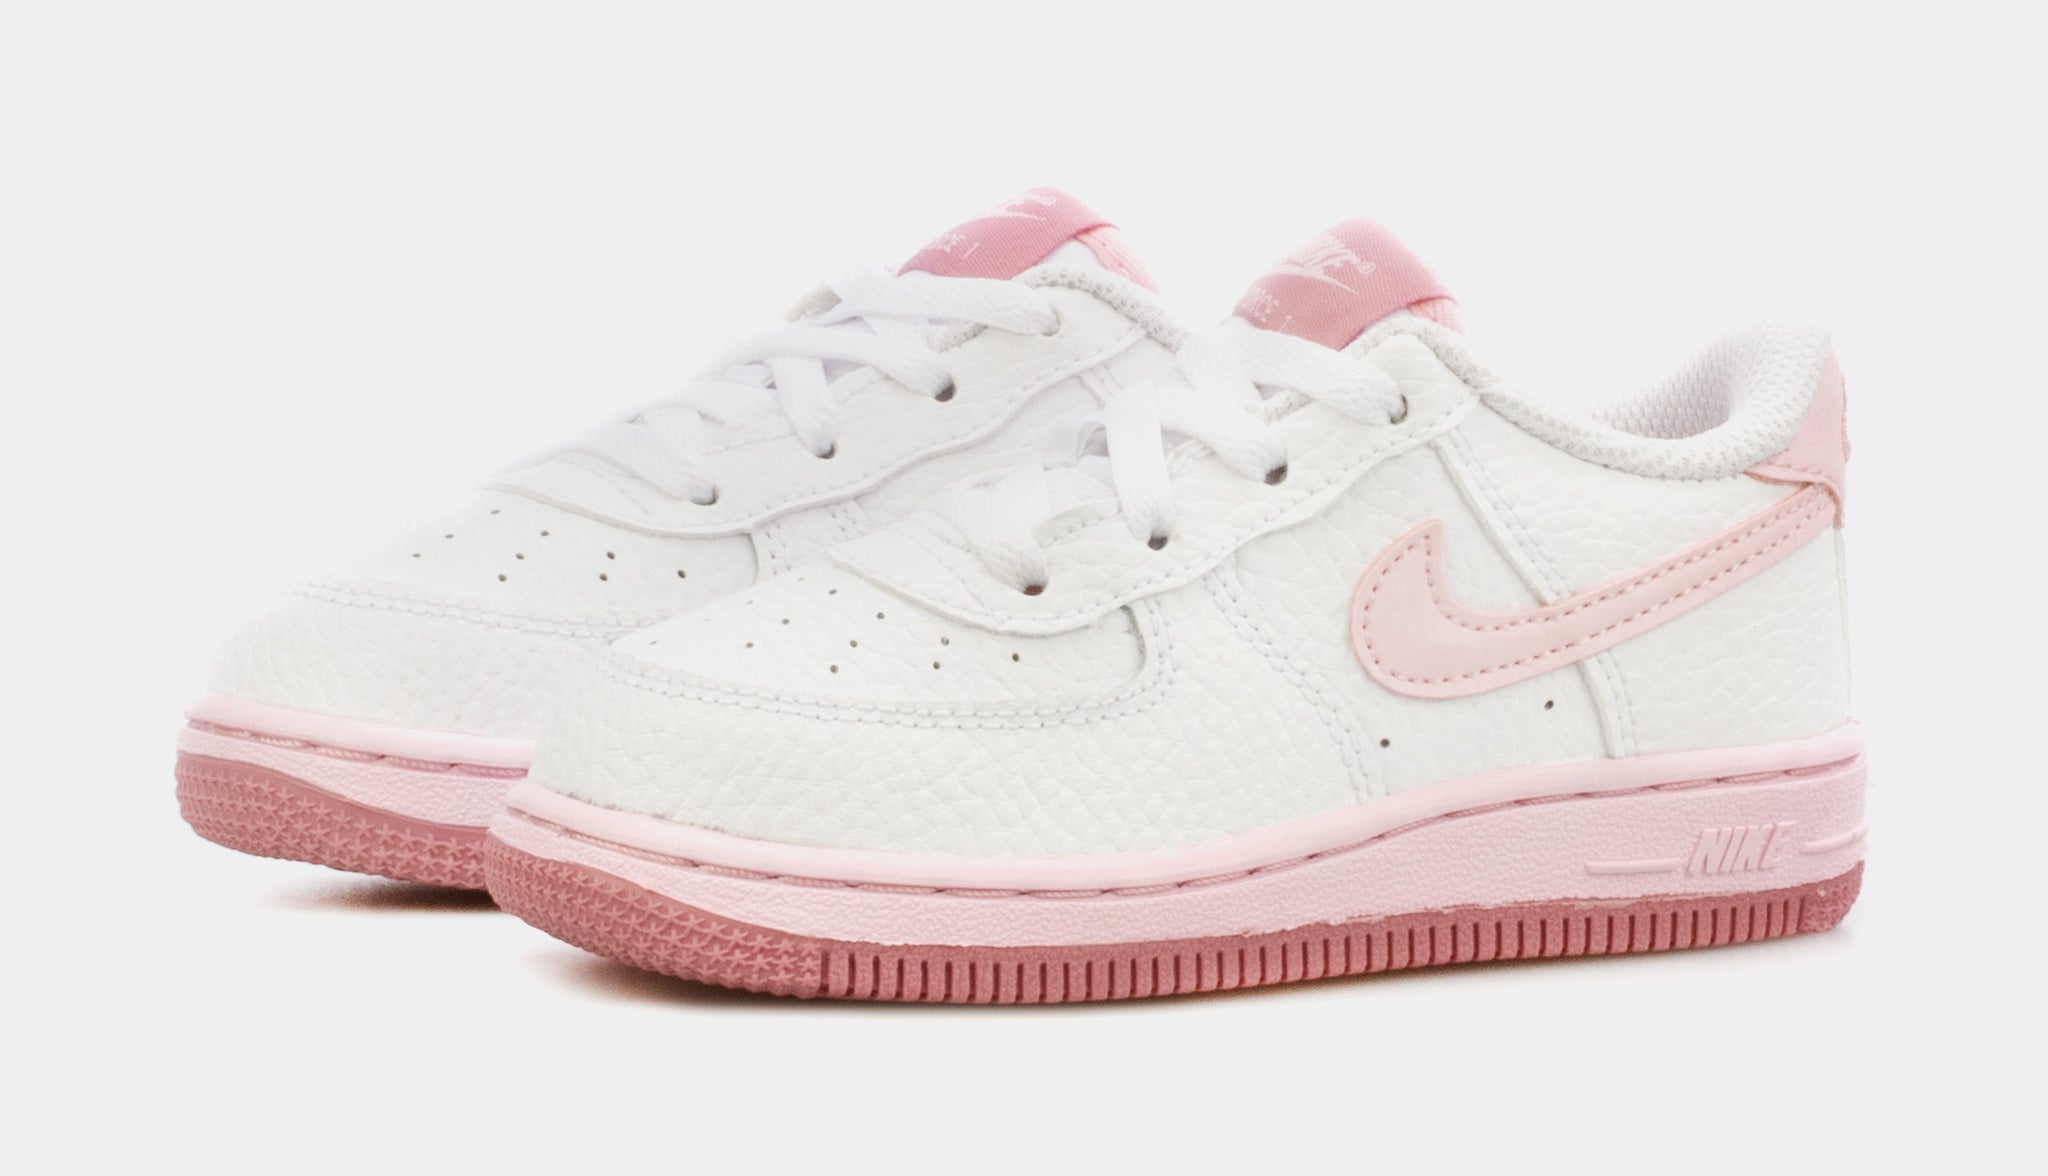 Pink Cherry Blossom Custom Air Force 1 Baby, Toddler, Little Kids Sneakers Low / 4 C (Toddler)